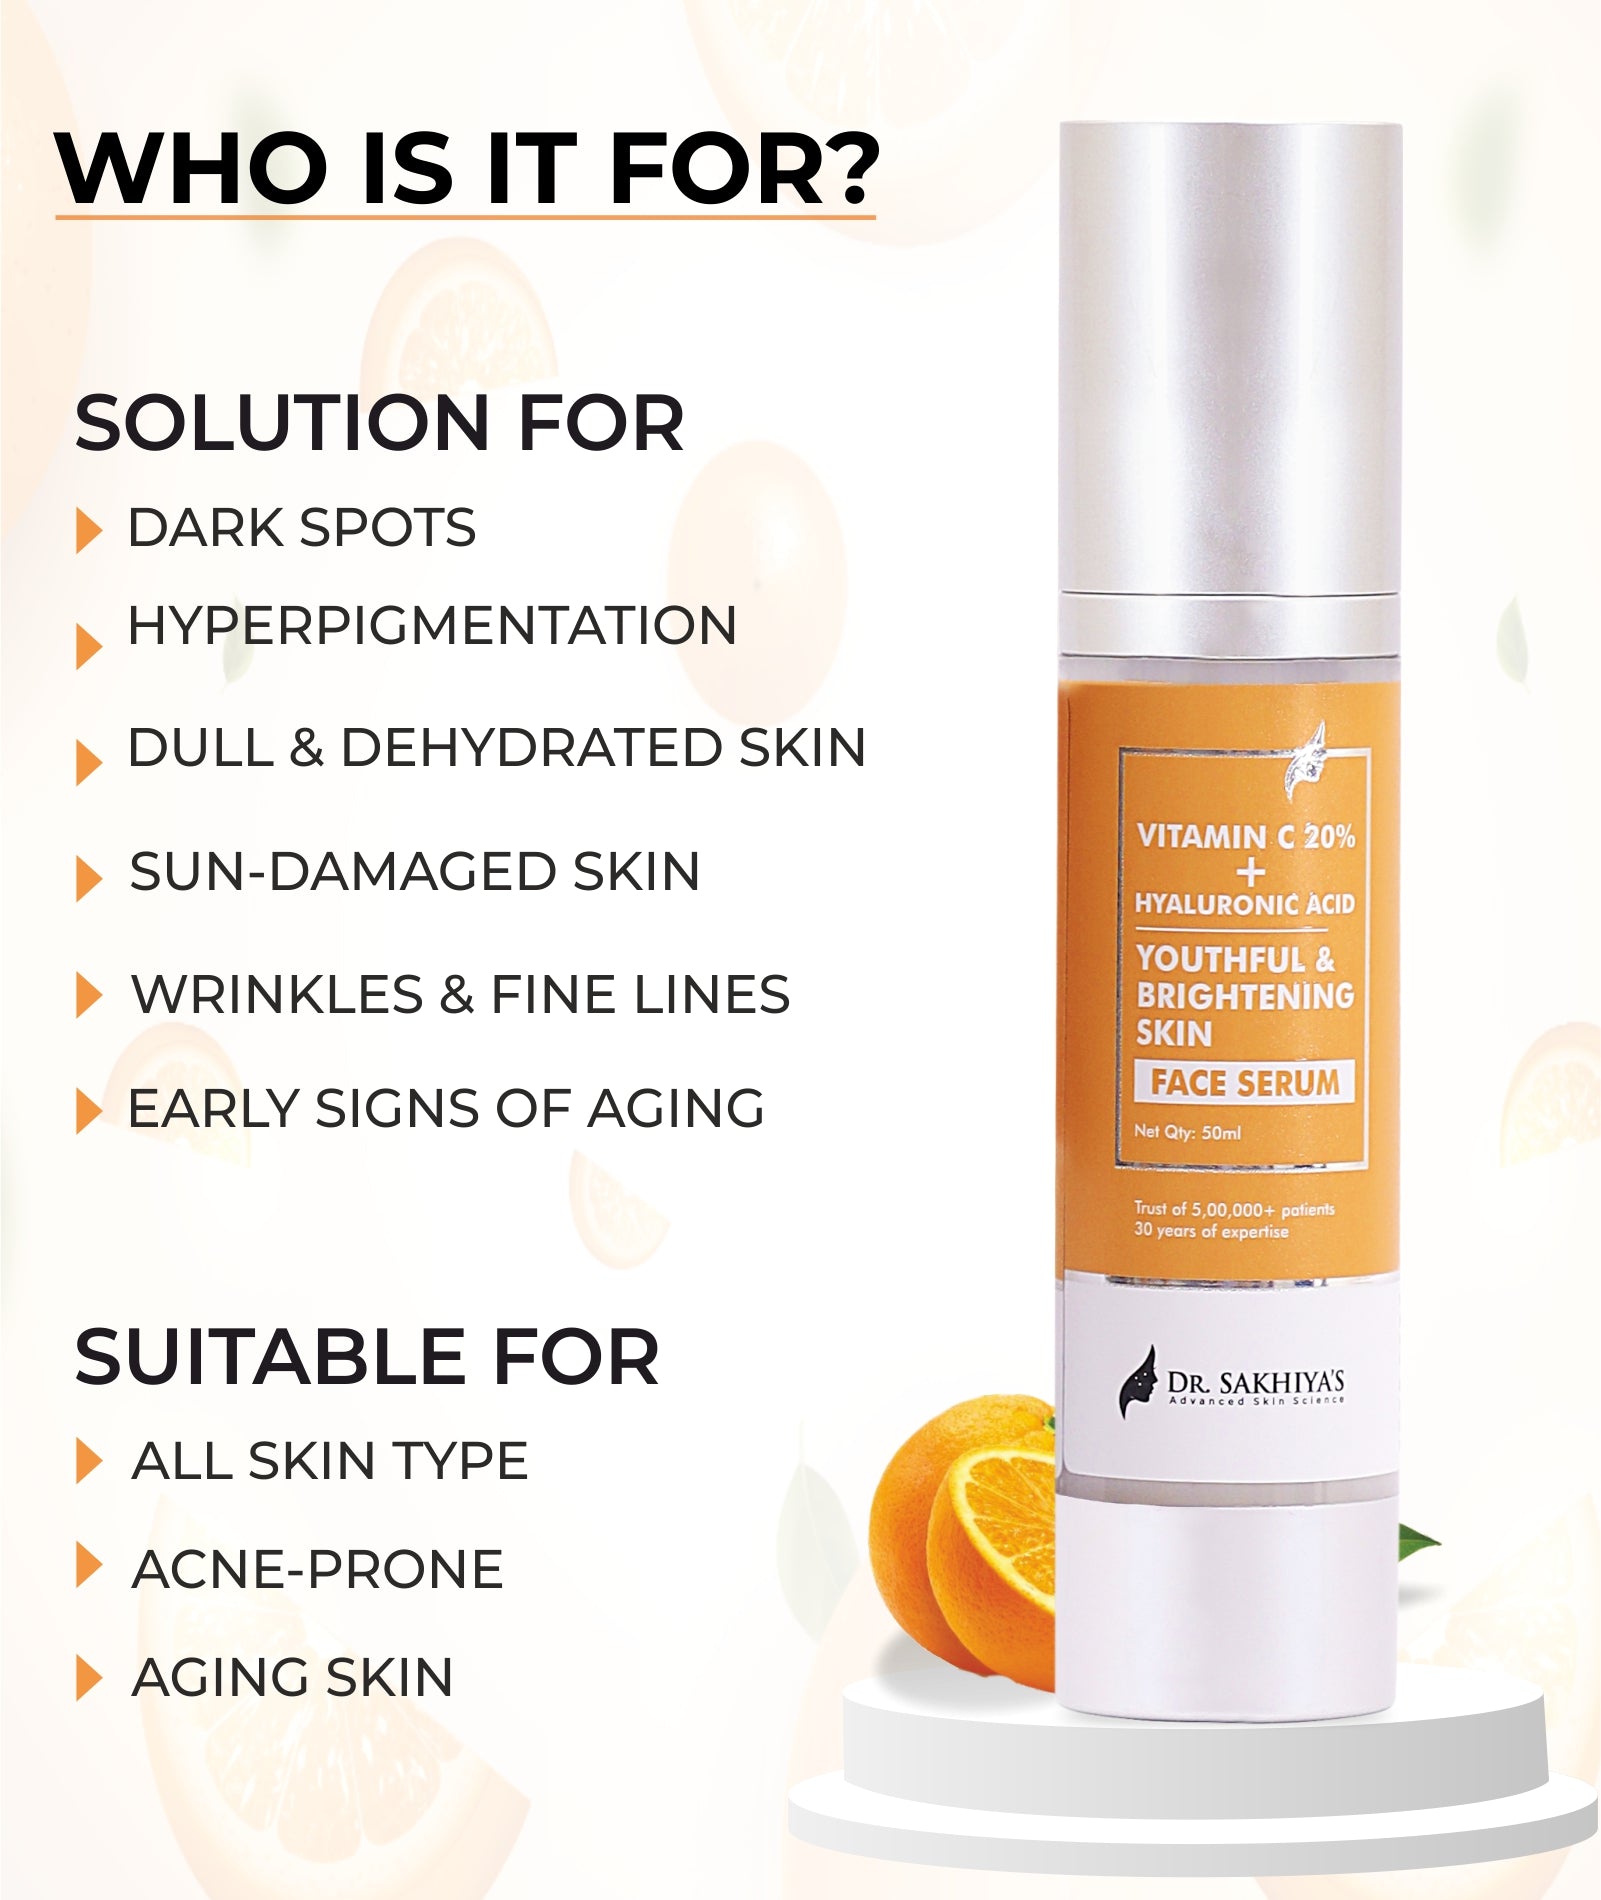 Get Rid Of Dark Spots, Hyperpigmentation, Dull, Dehydrated And Sun Damaged Skin With this Vitamin C Face Serum, Suitable For All Types Of Skin